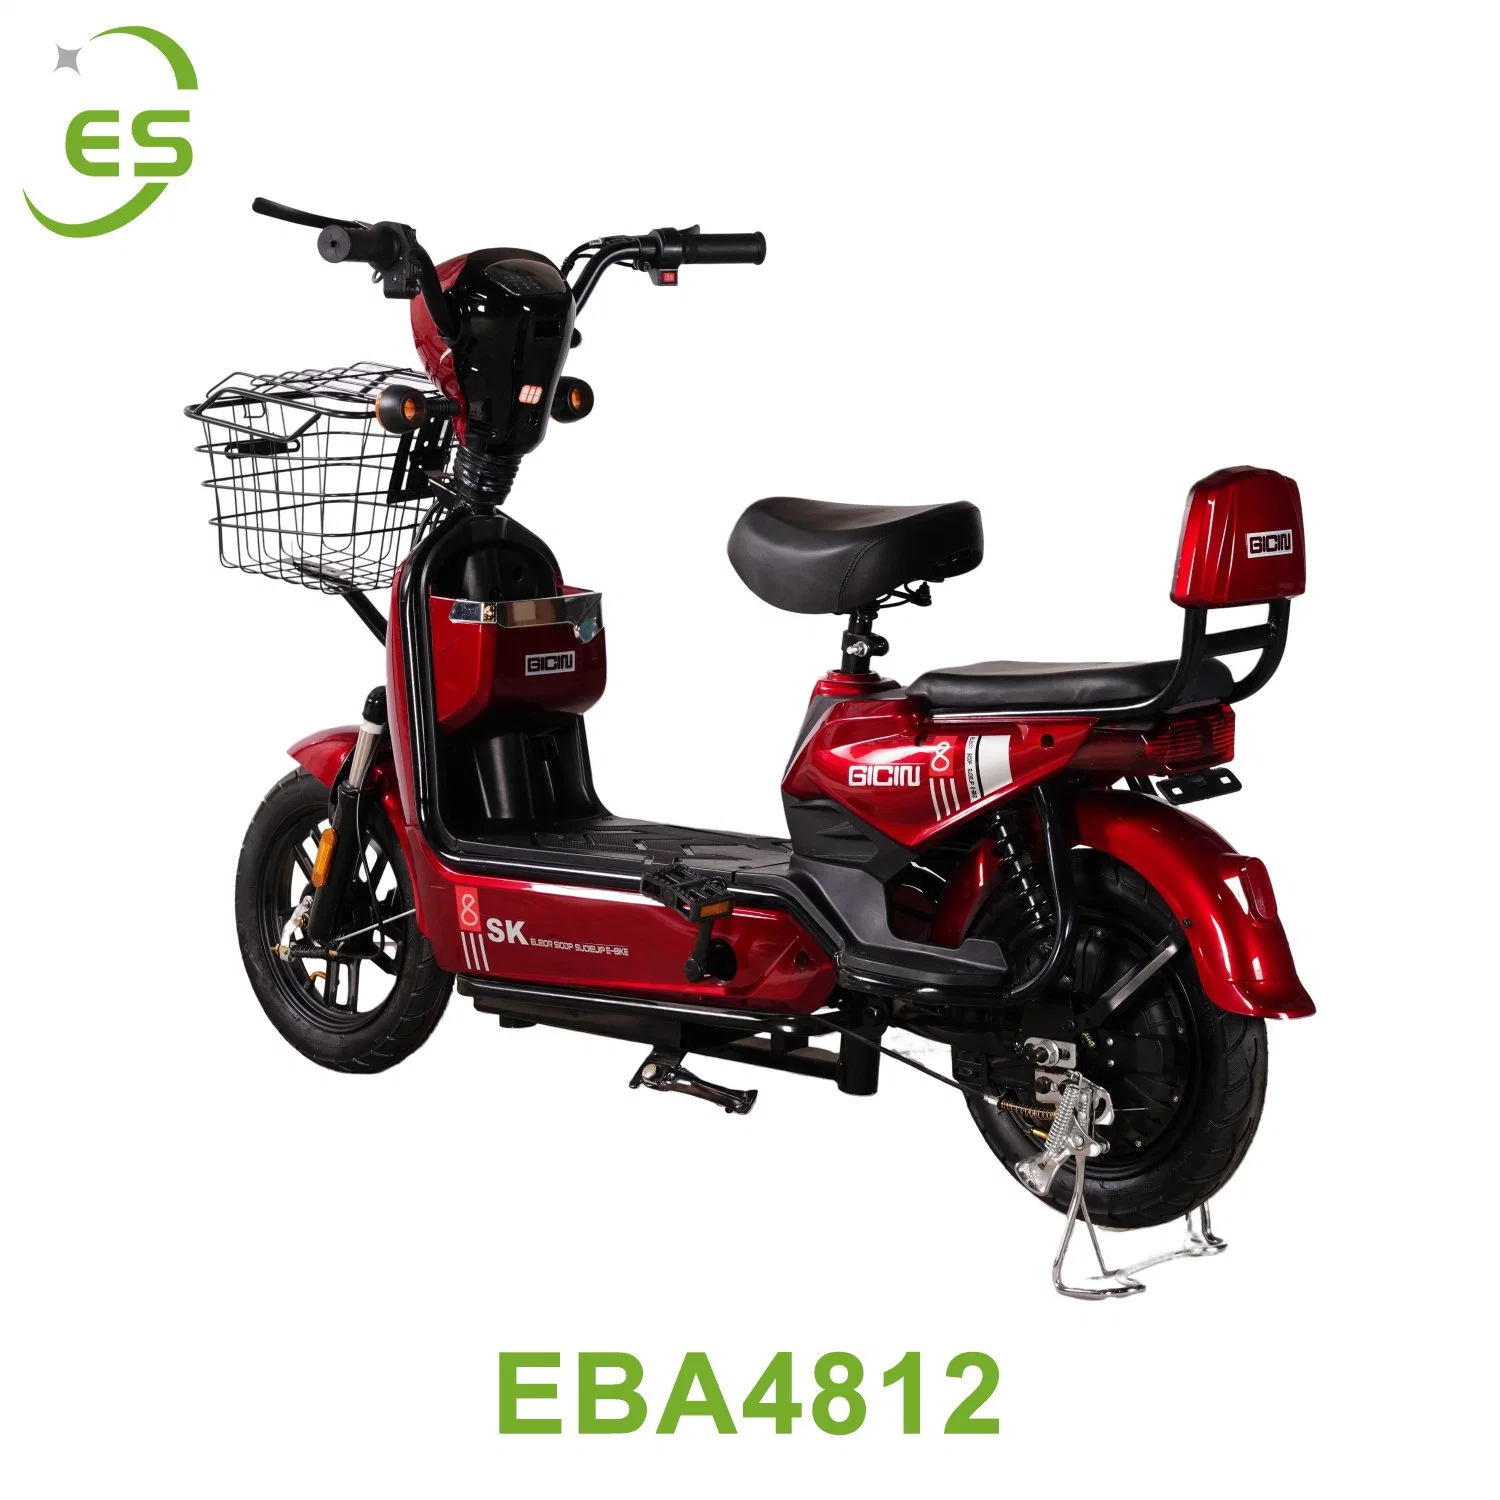 China Factory Produces Electric Bicycles Can Be Customized to Produce New Electric Bicycles Sell